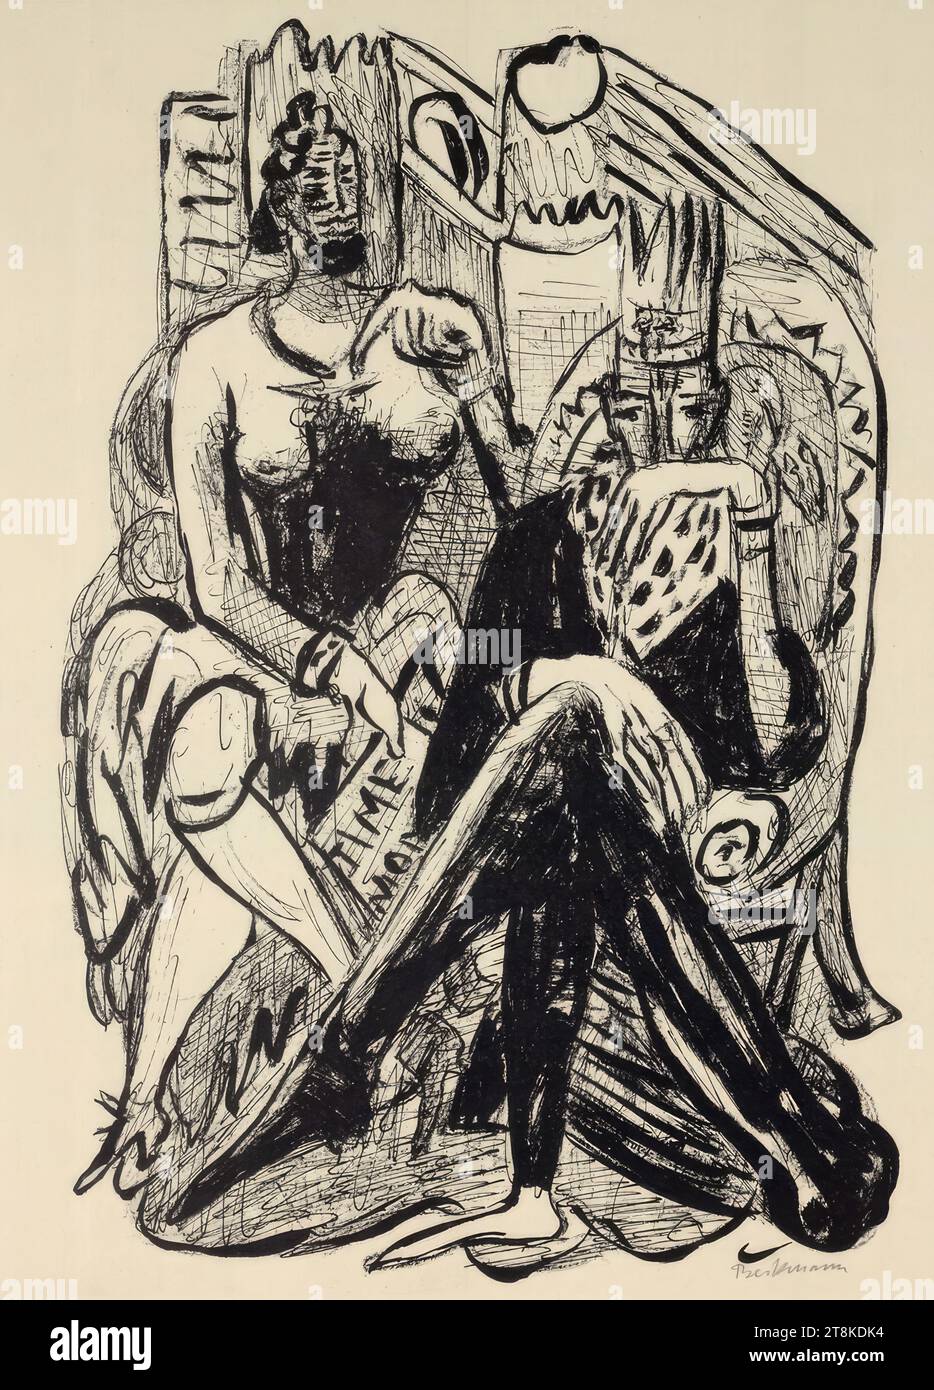 King and demagogue, illustrations from Day and Dream, Max Beckmann, Leipzig 1884 - 1950 New York, 1920, print, lithograph, plate: 375 mm x 245 mm Stock Photo